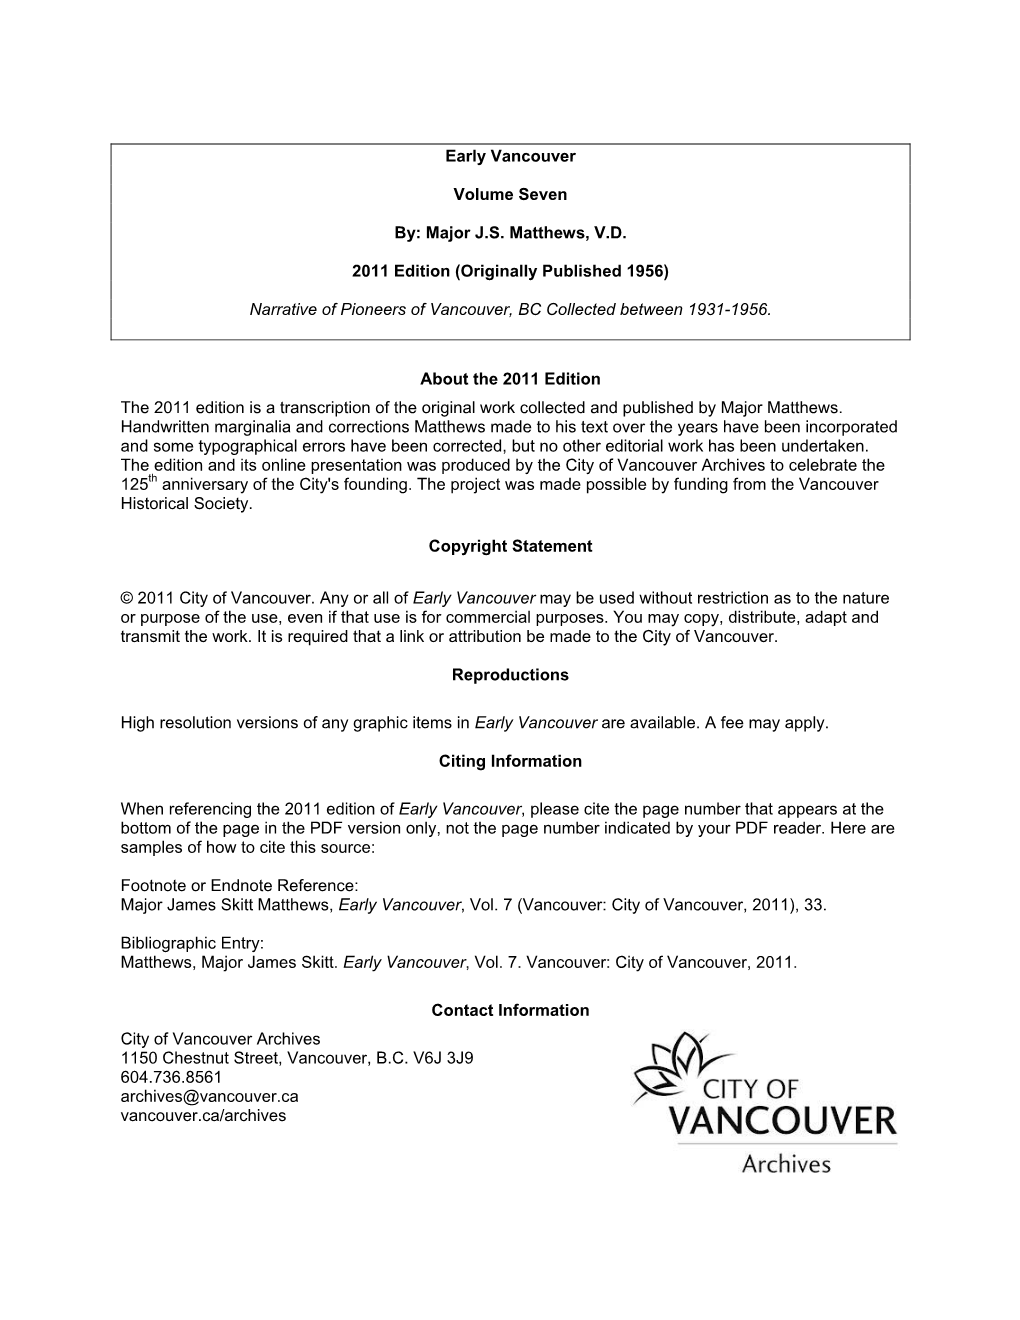 Early Vancouver Volume Seven